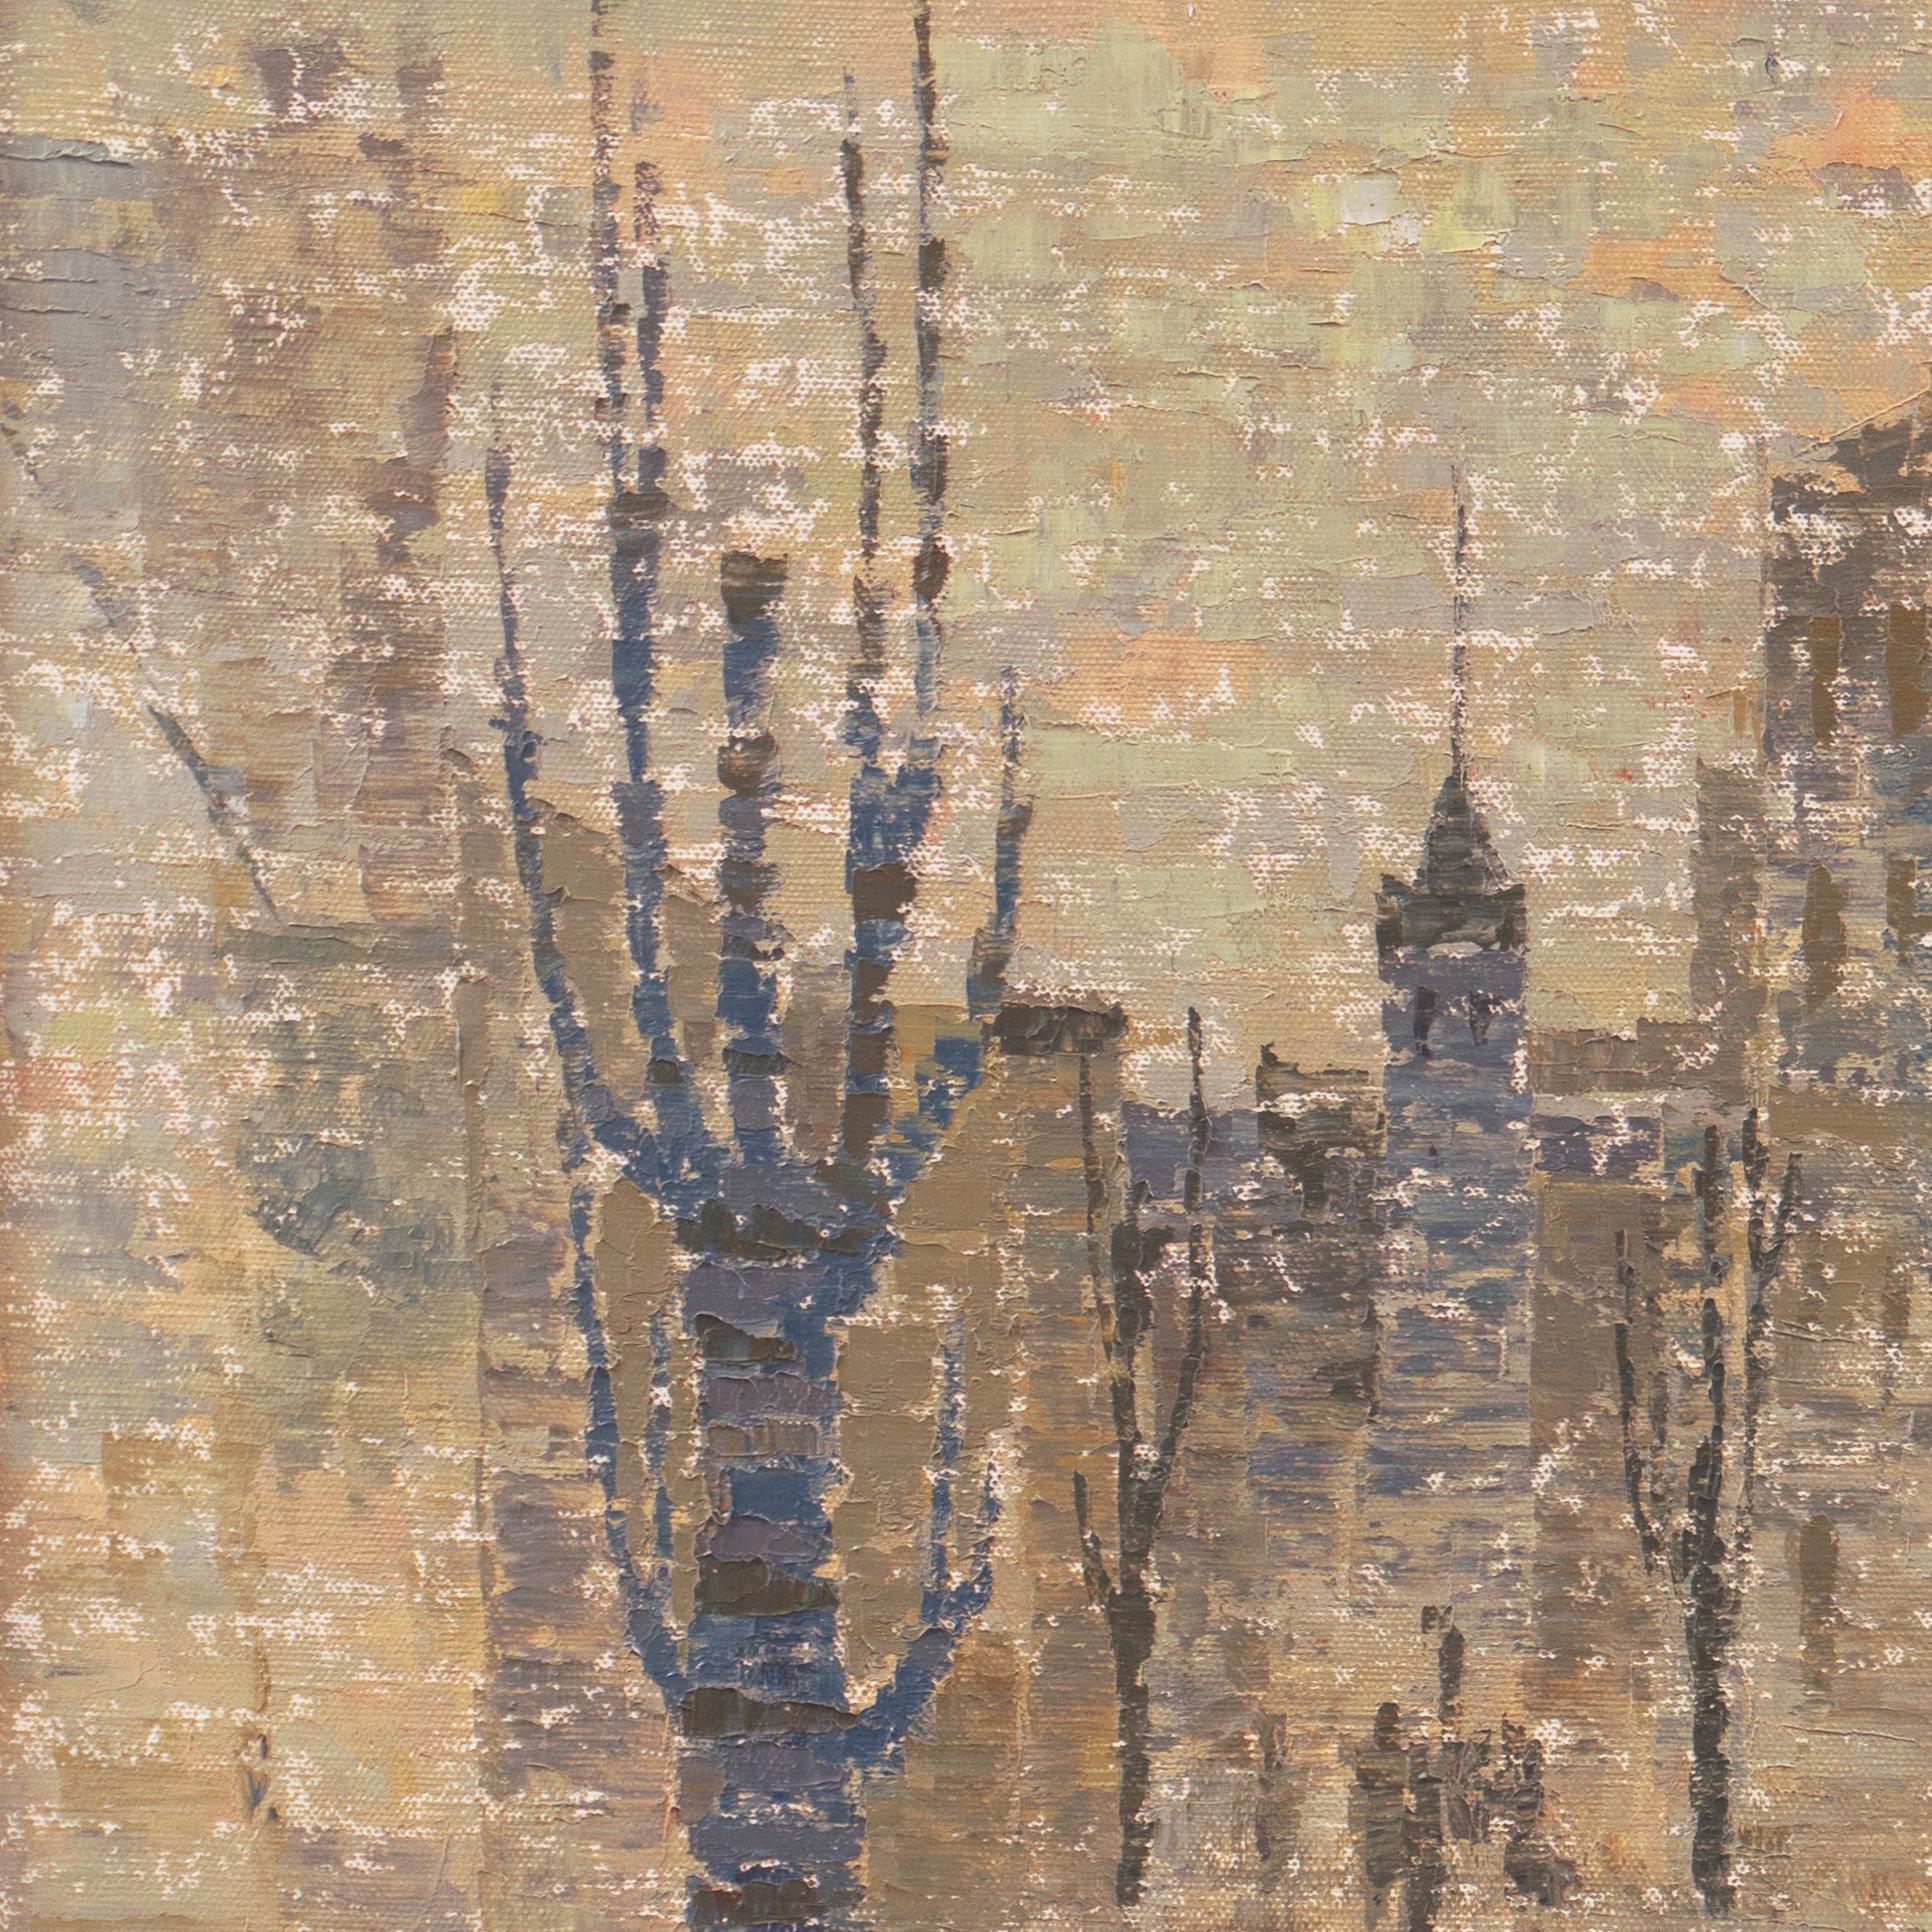 'Cityscape with Figures', Korean Tonalist Oil,  Salon Pagodong, Seoul, LACMA - Abstract Painting by Young-il Ahn